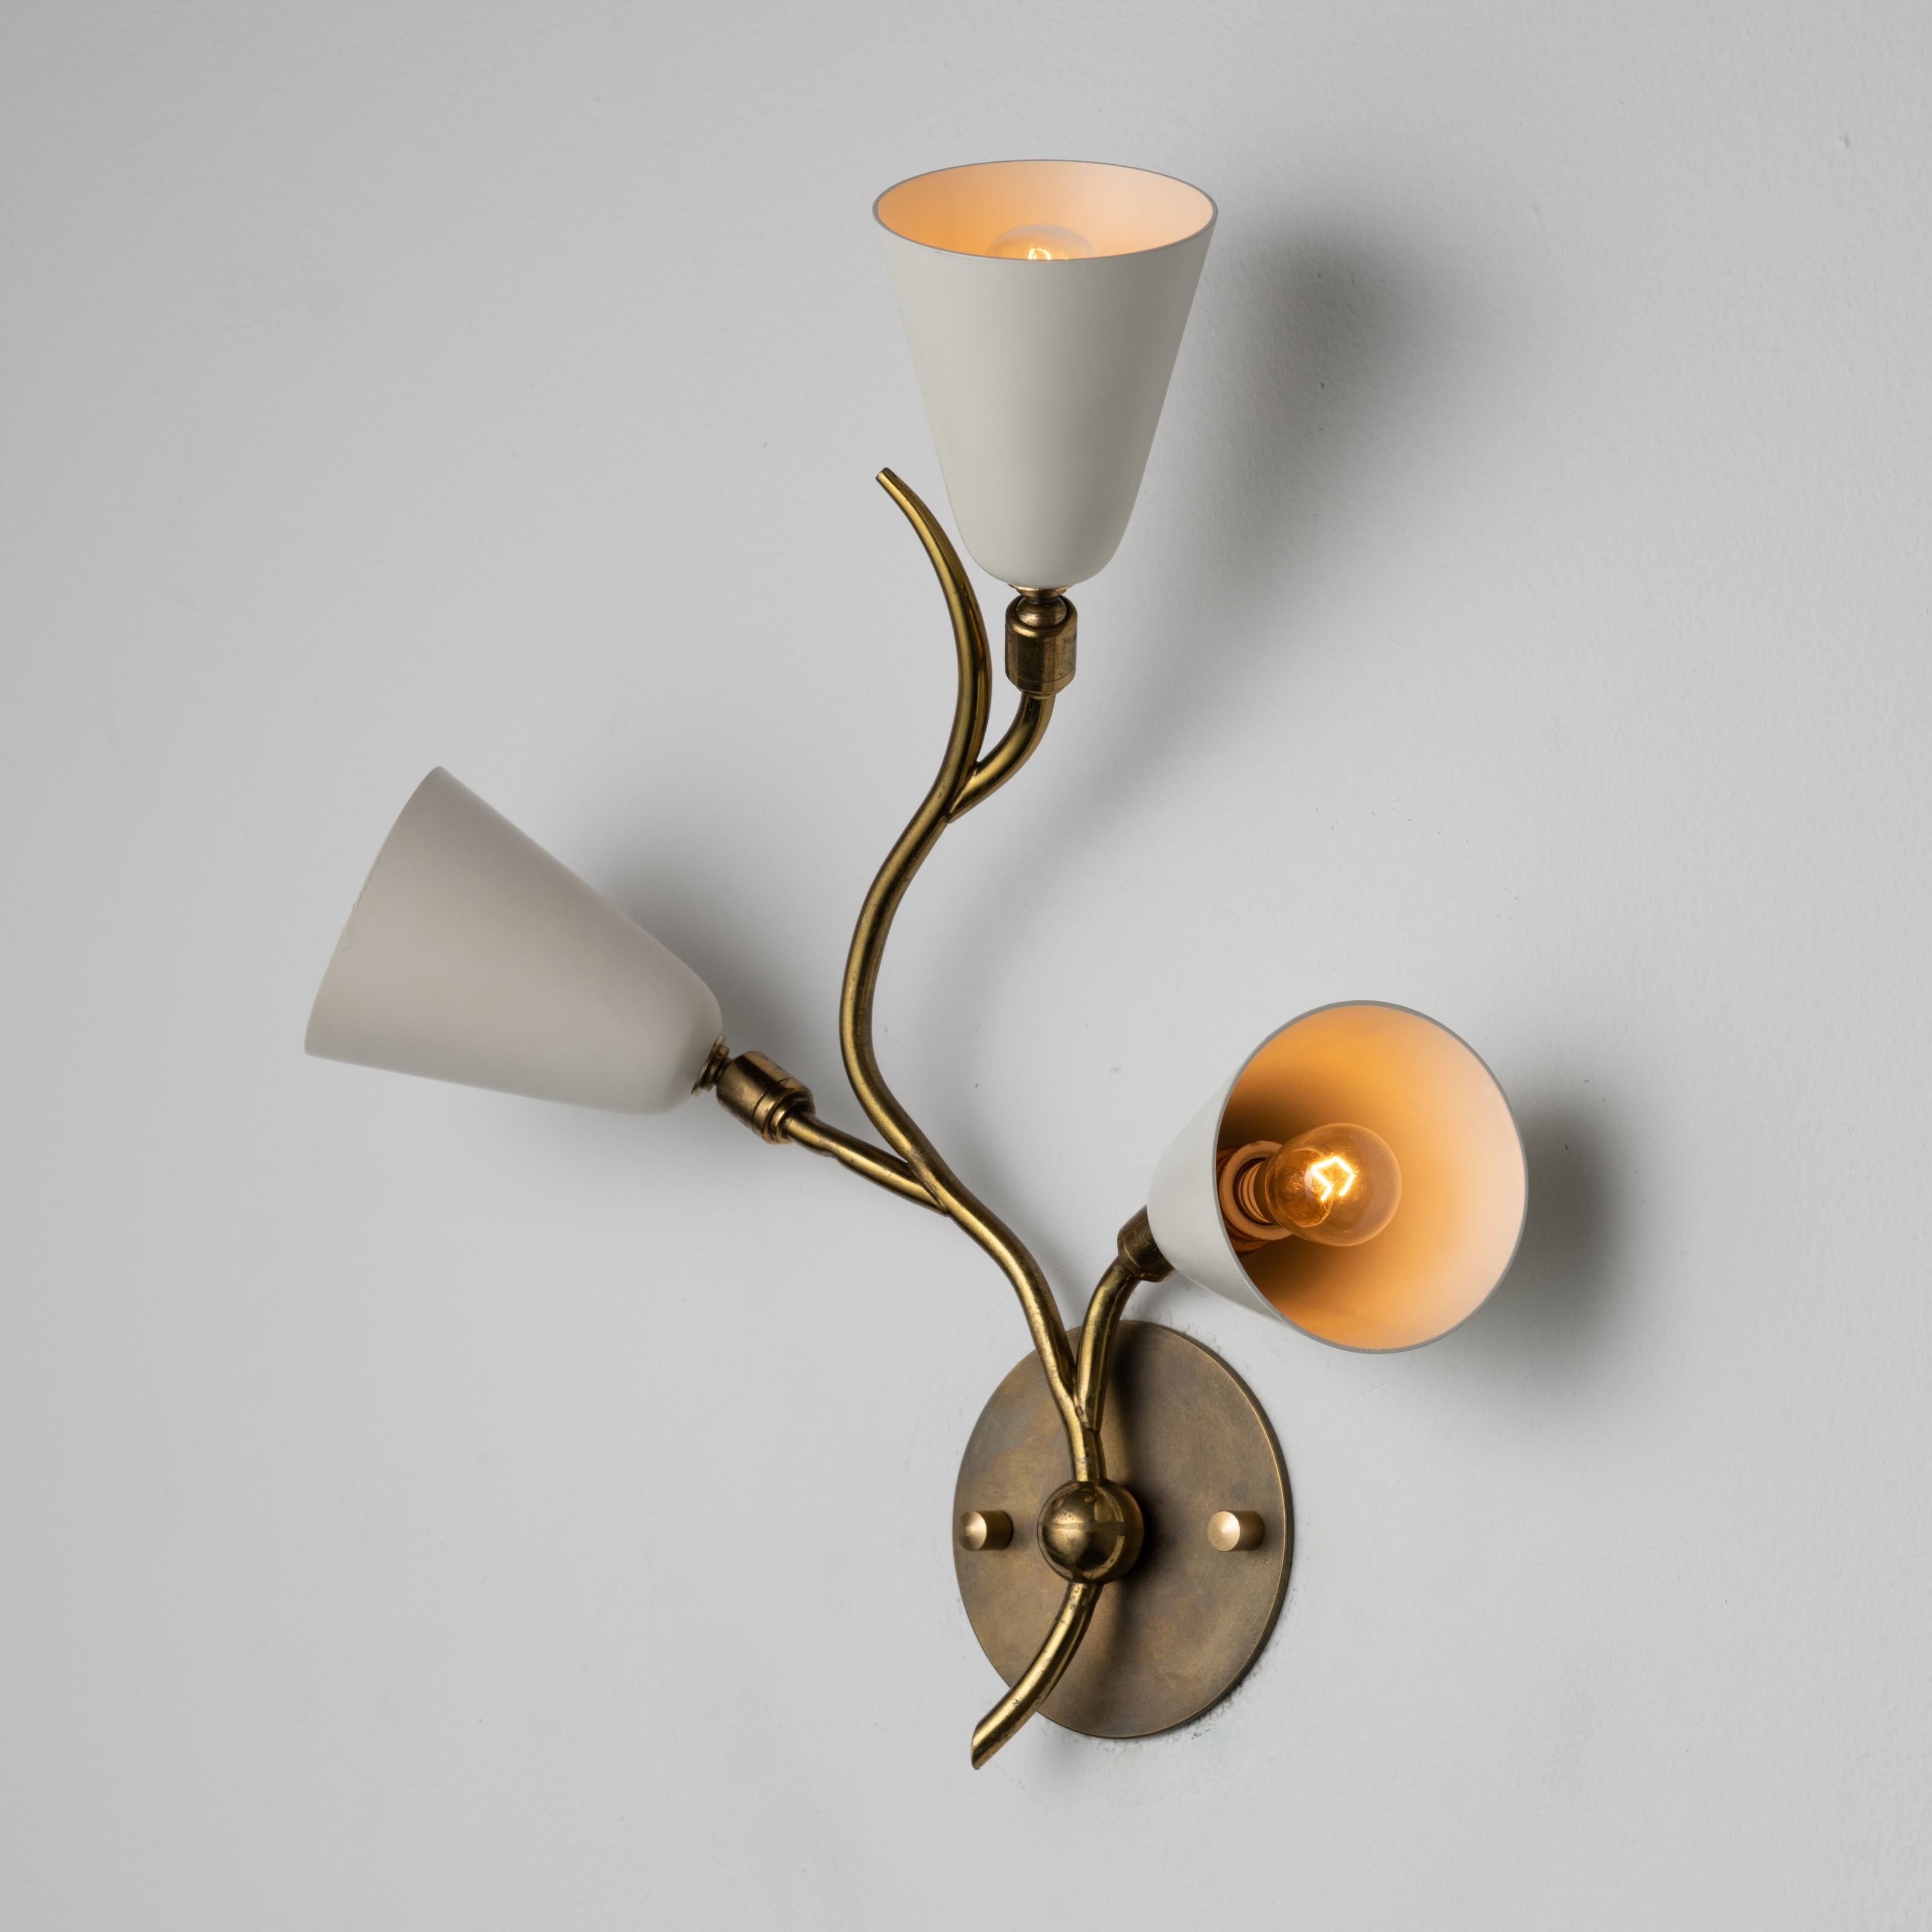 Pair of Italian sconces. Designed and manufactured in Italy, circa the 1950s. Three tulip-shaped sconces sit on branch-like stems. The shades pivot slightly on ball joints, allowing for illuminating positioning. Holds three E12 sockets, adapted for